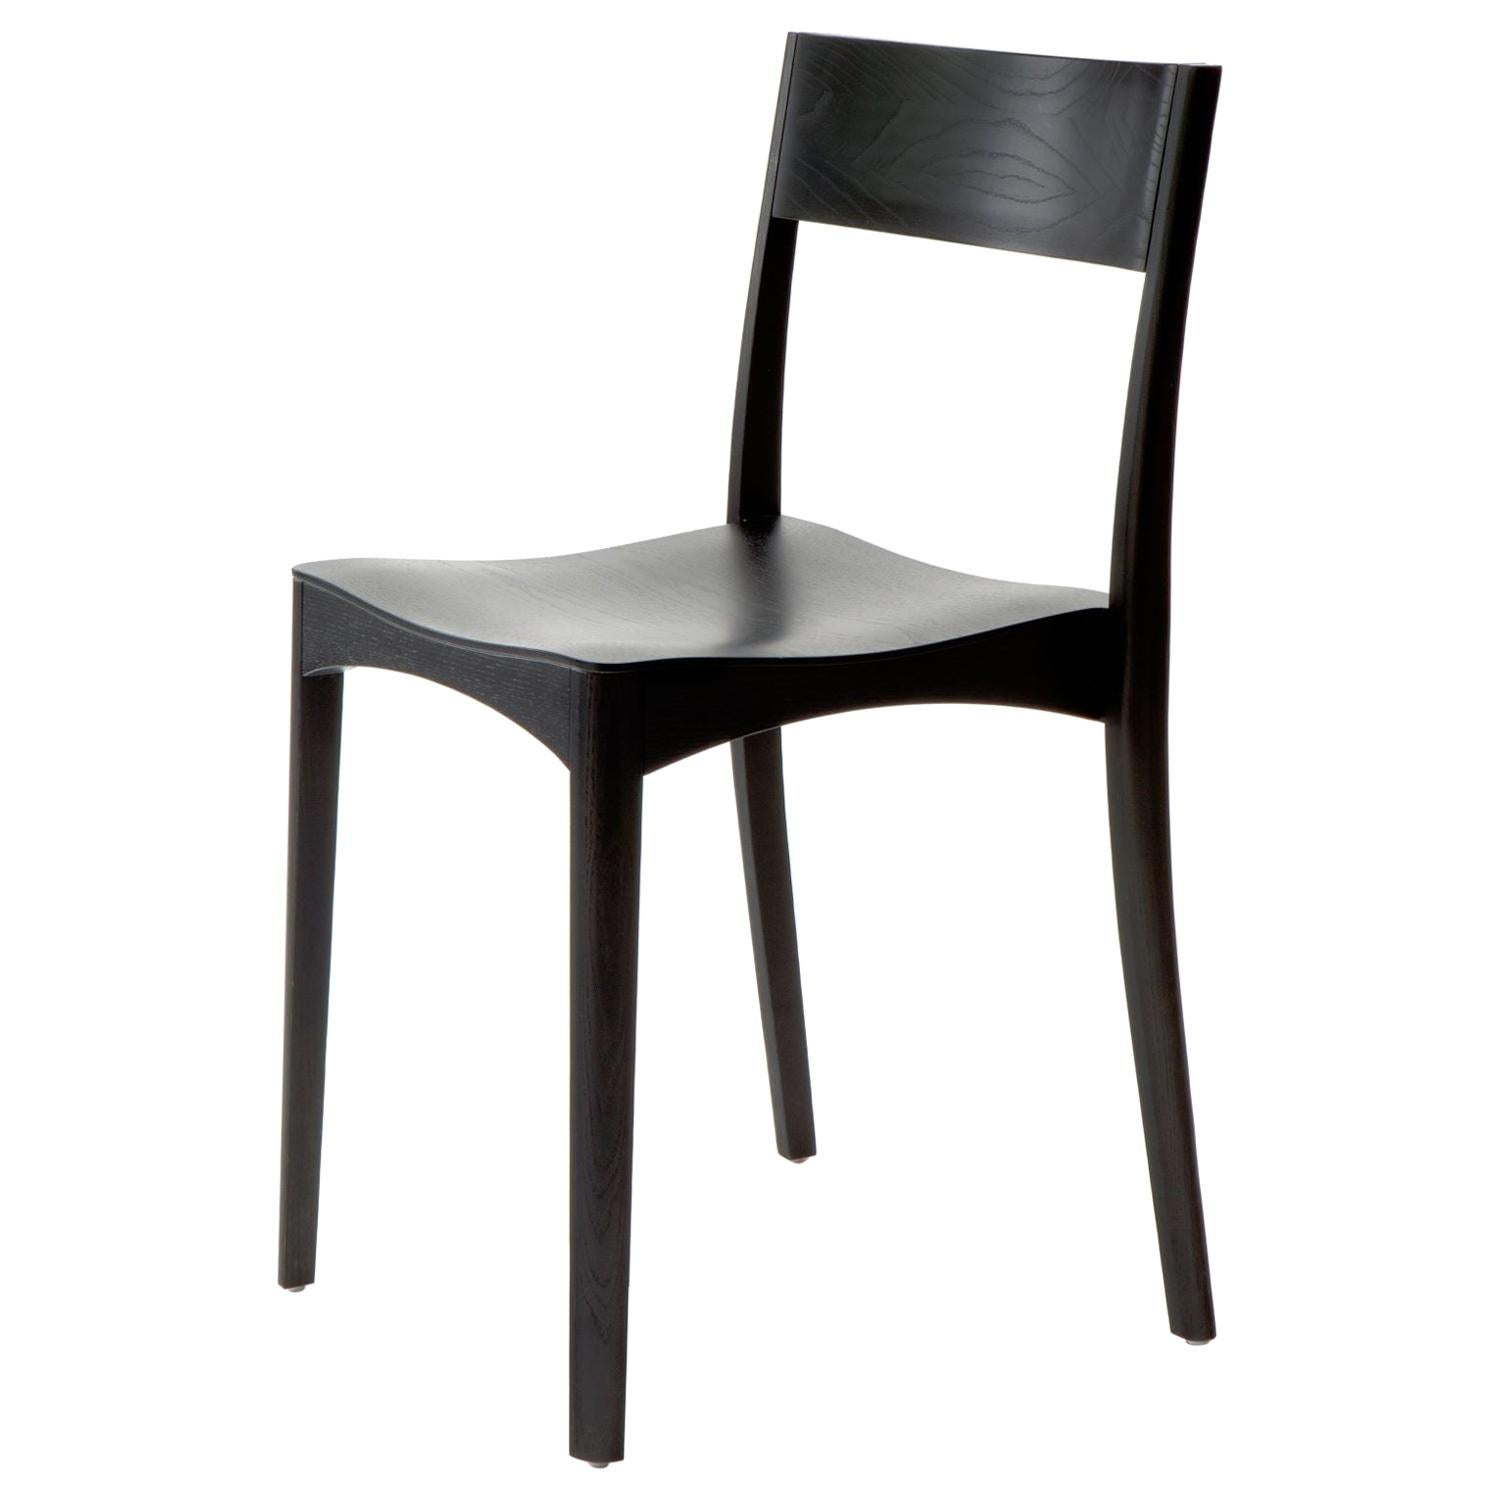 October Light Chair in Ash by Samuli Naamanka For Sale